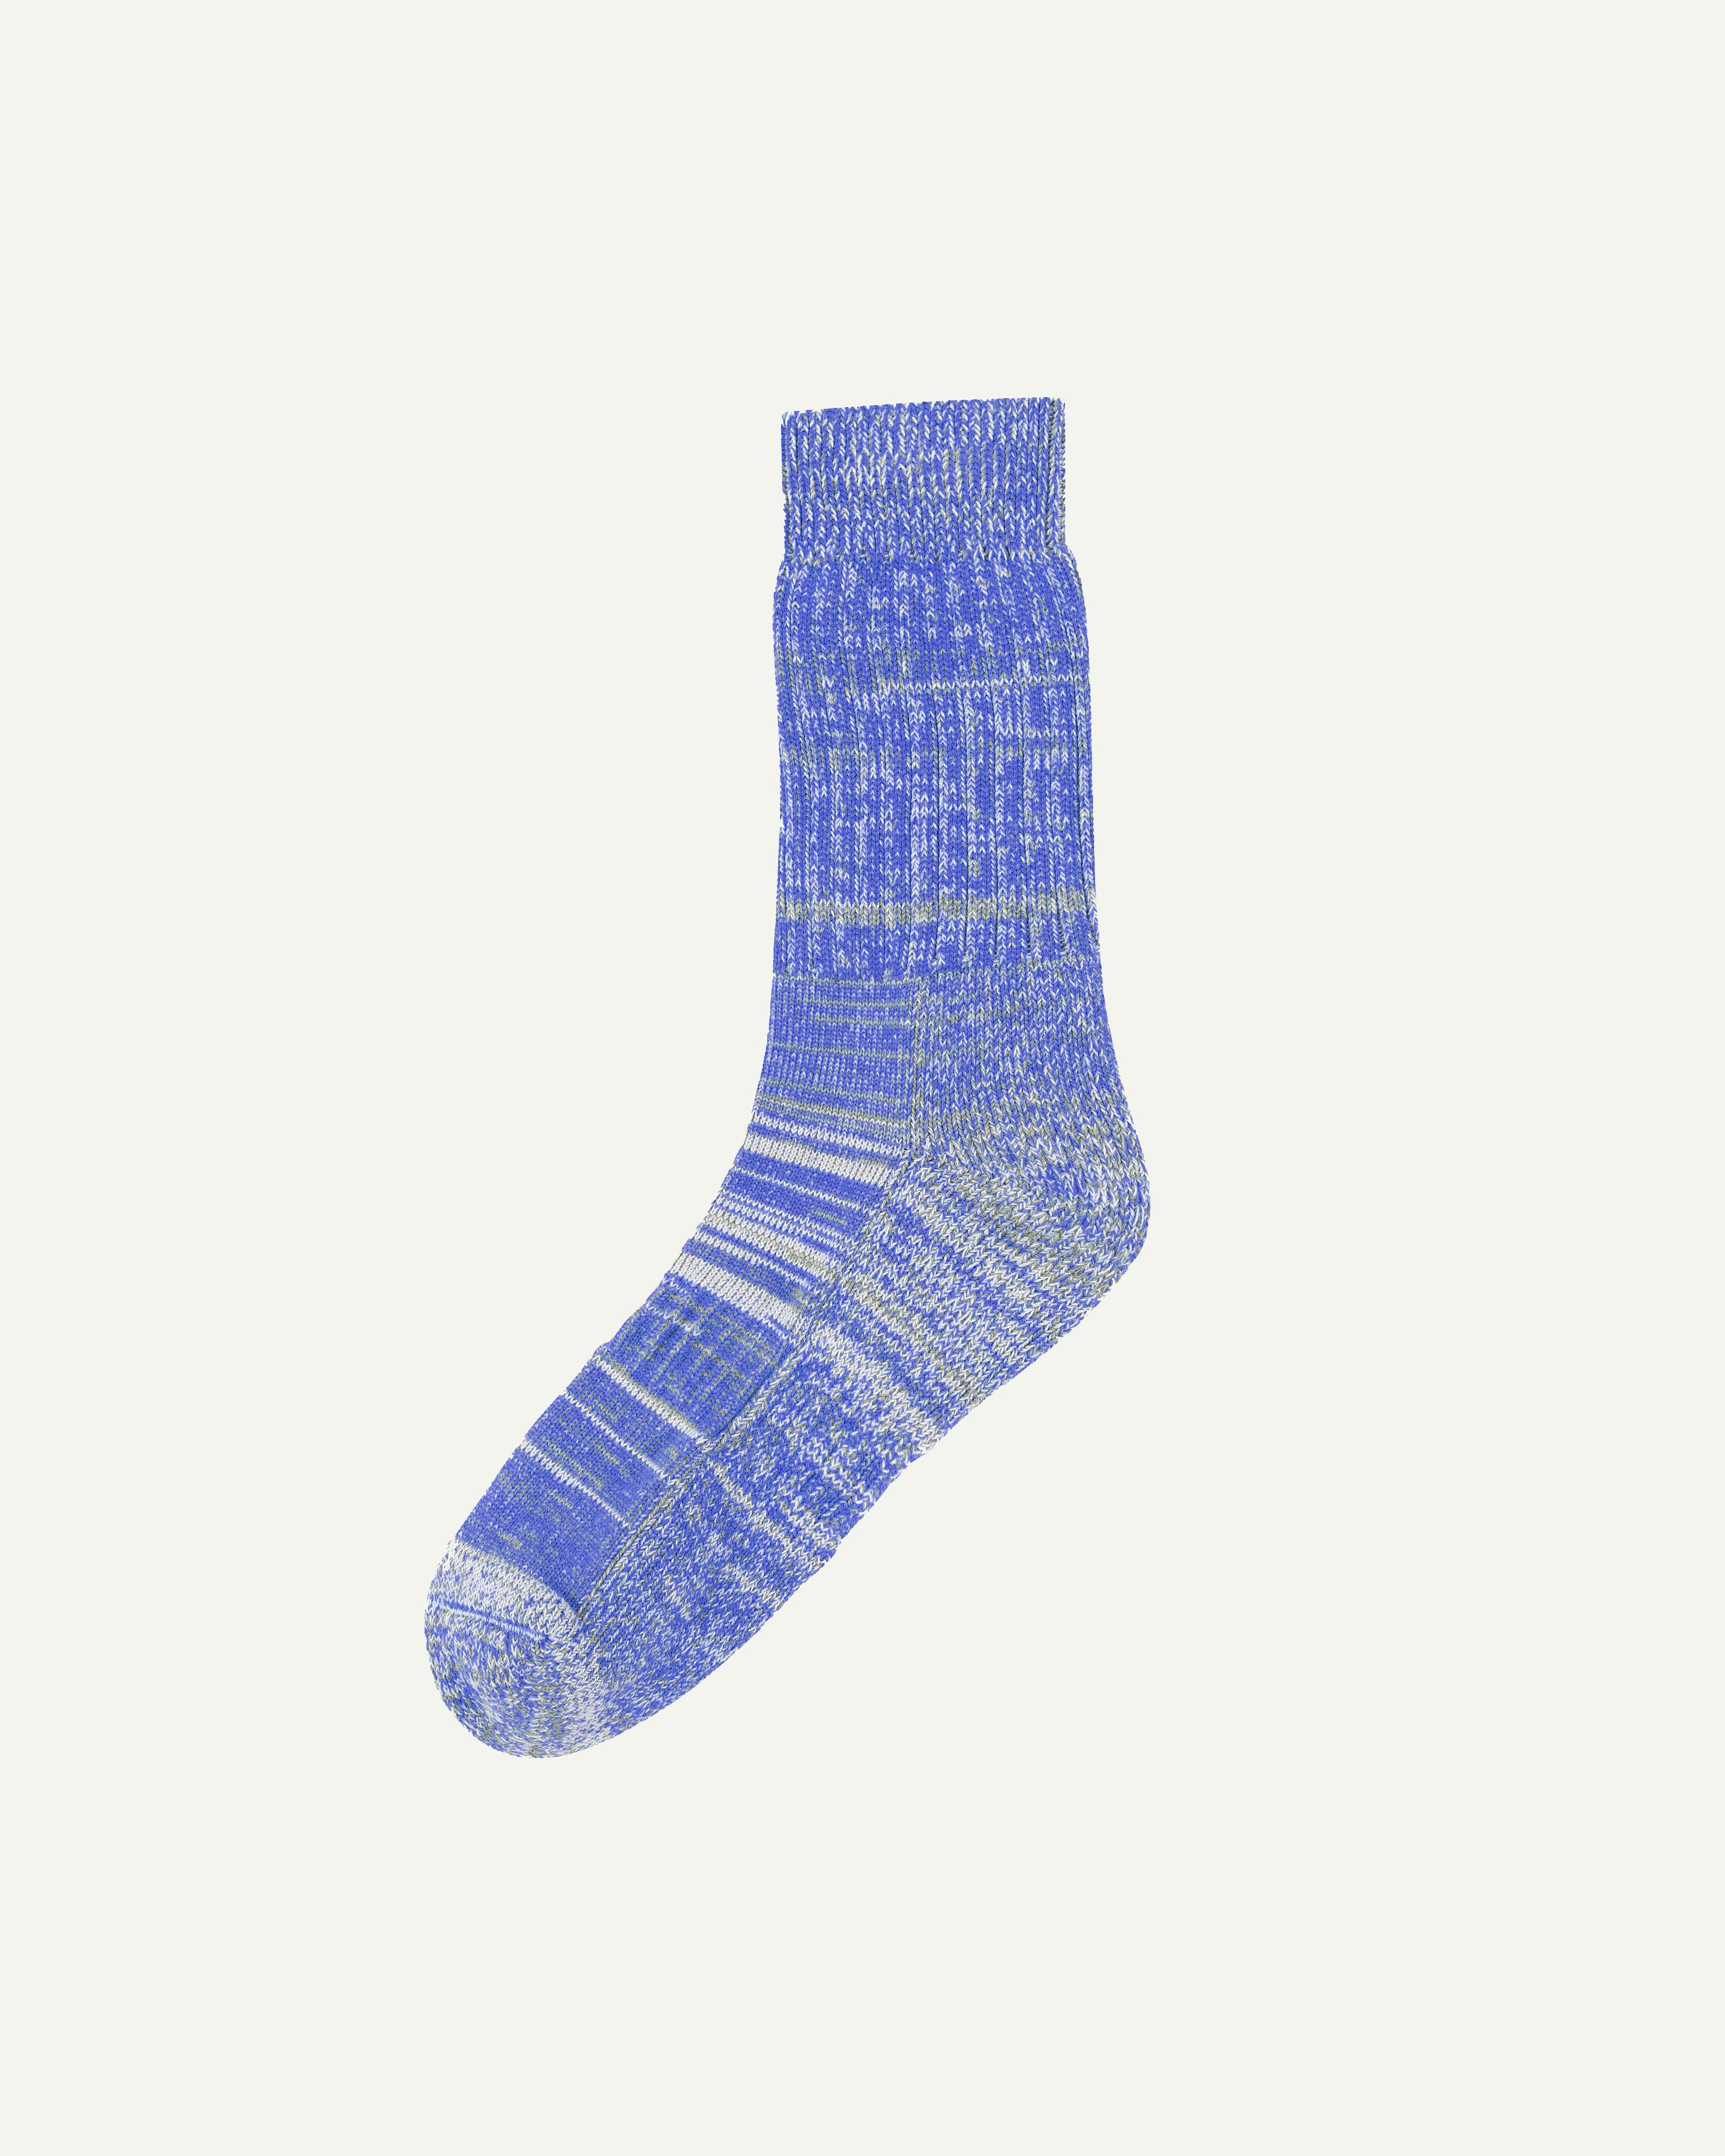 Flat view of Uskees #4006 organic cotton socks in ultra blue, showing subtle bands of blue, white and  yellow